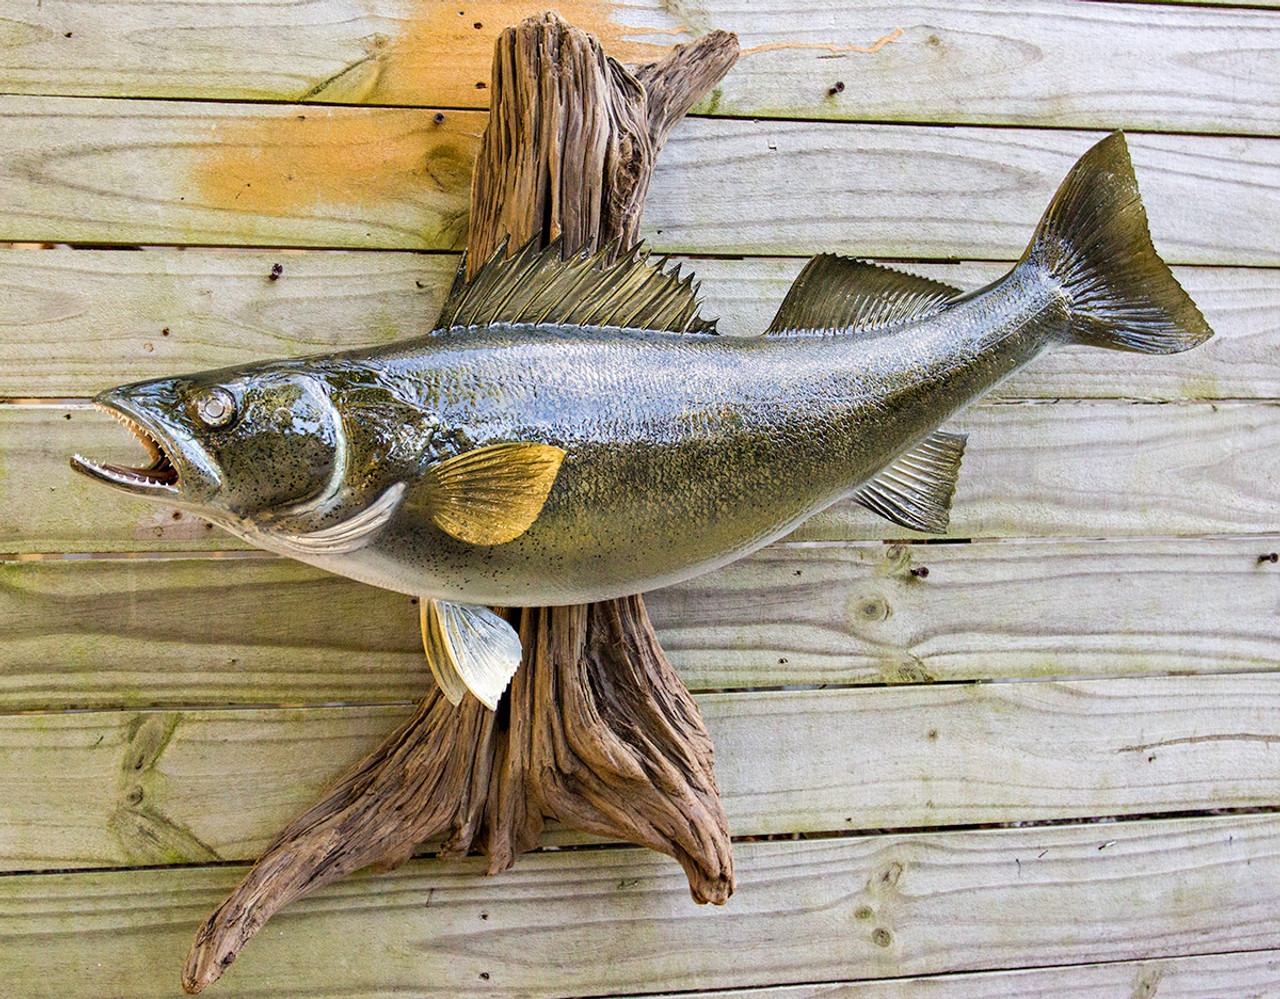 https://cdn11.bigcommerce.com/s-uy636a/images/stencil/1280x1280/products/602/1597/Walleye-31L-2-on-driftwood__77864.1634049284.jpg?c=2?imbypass=on